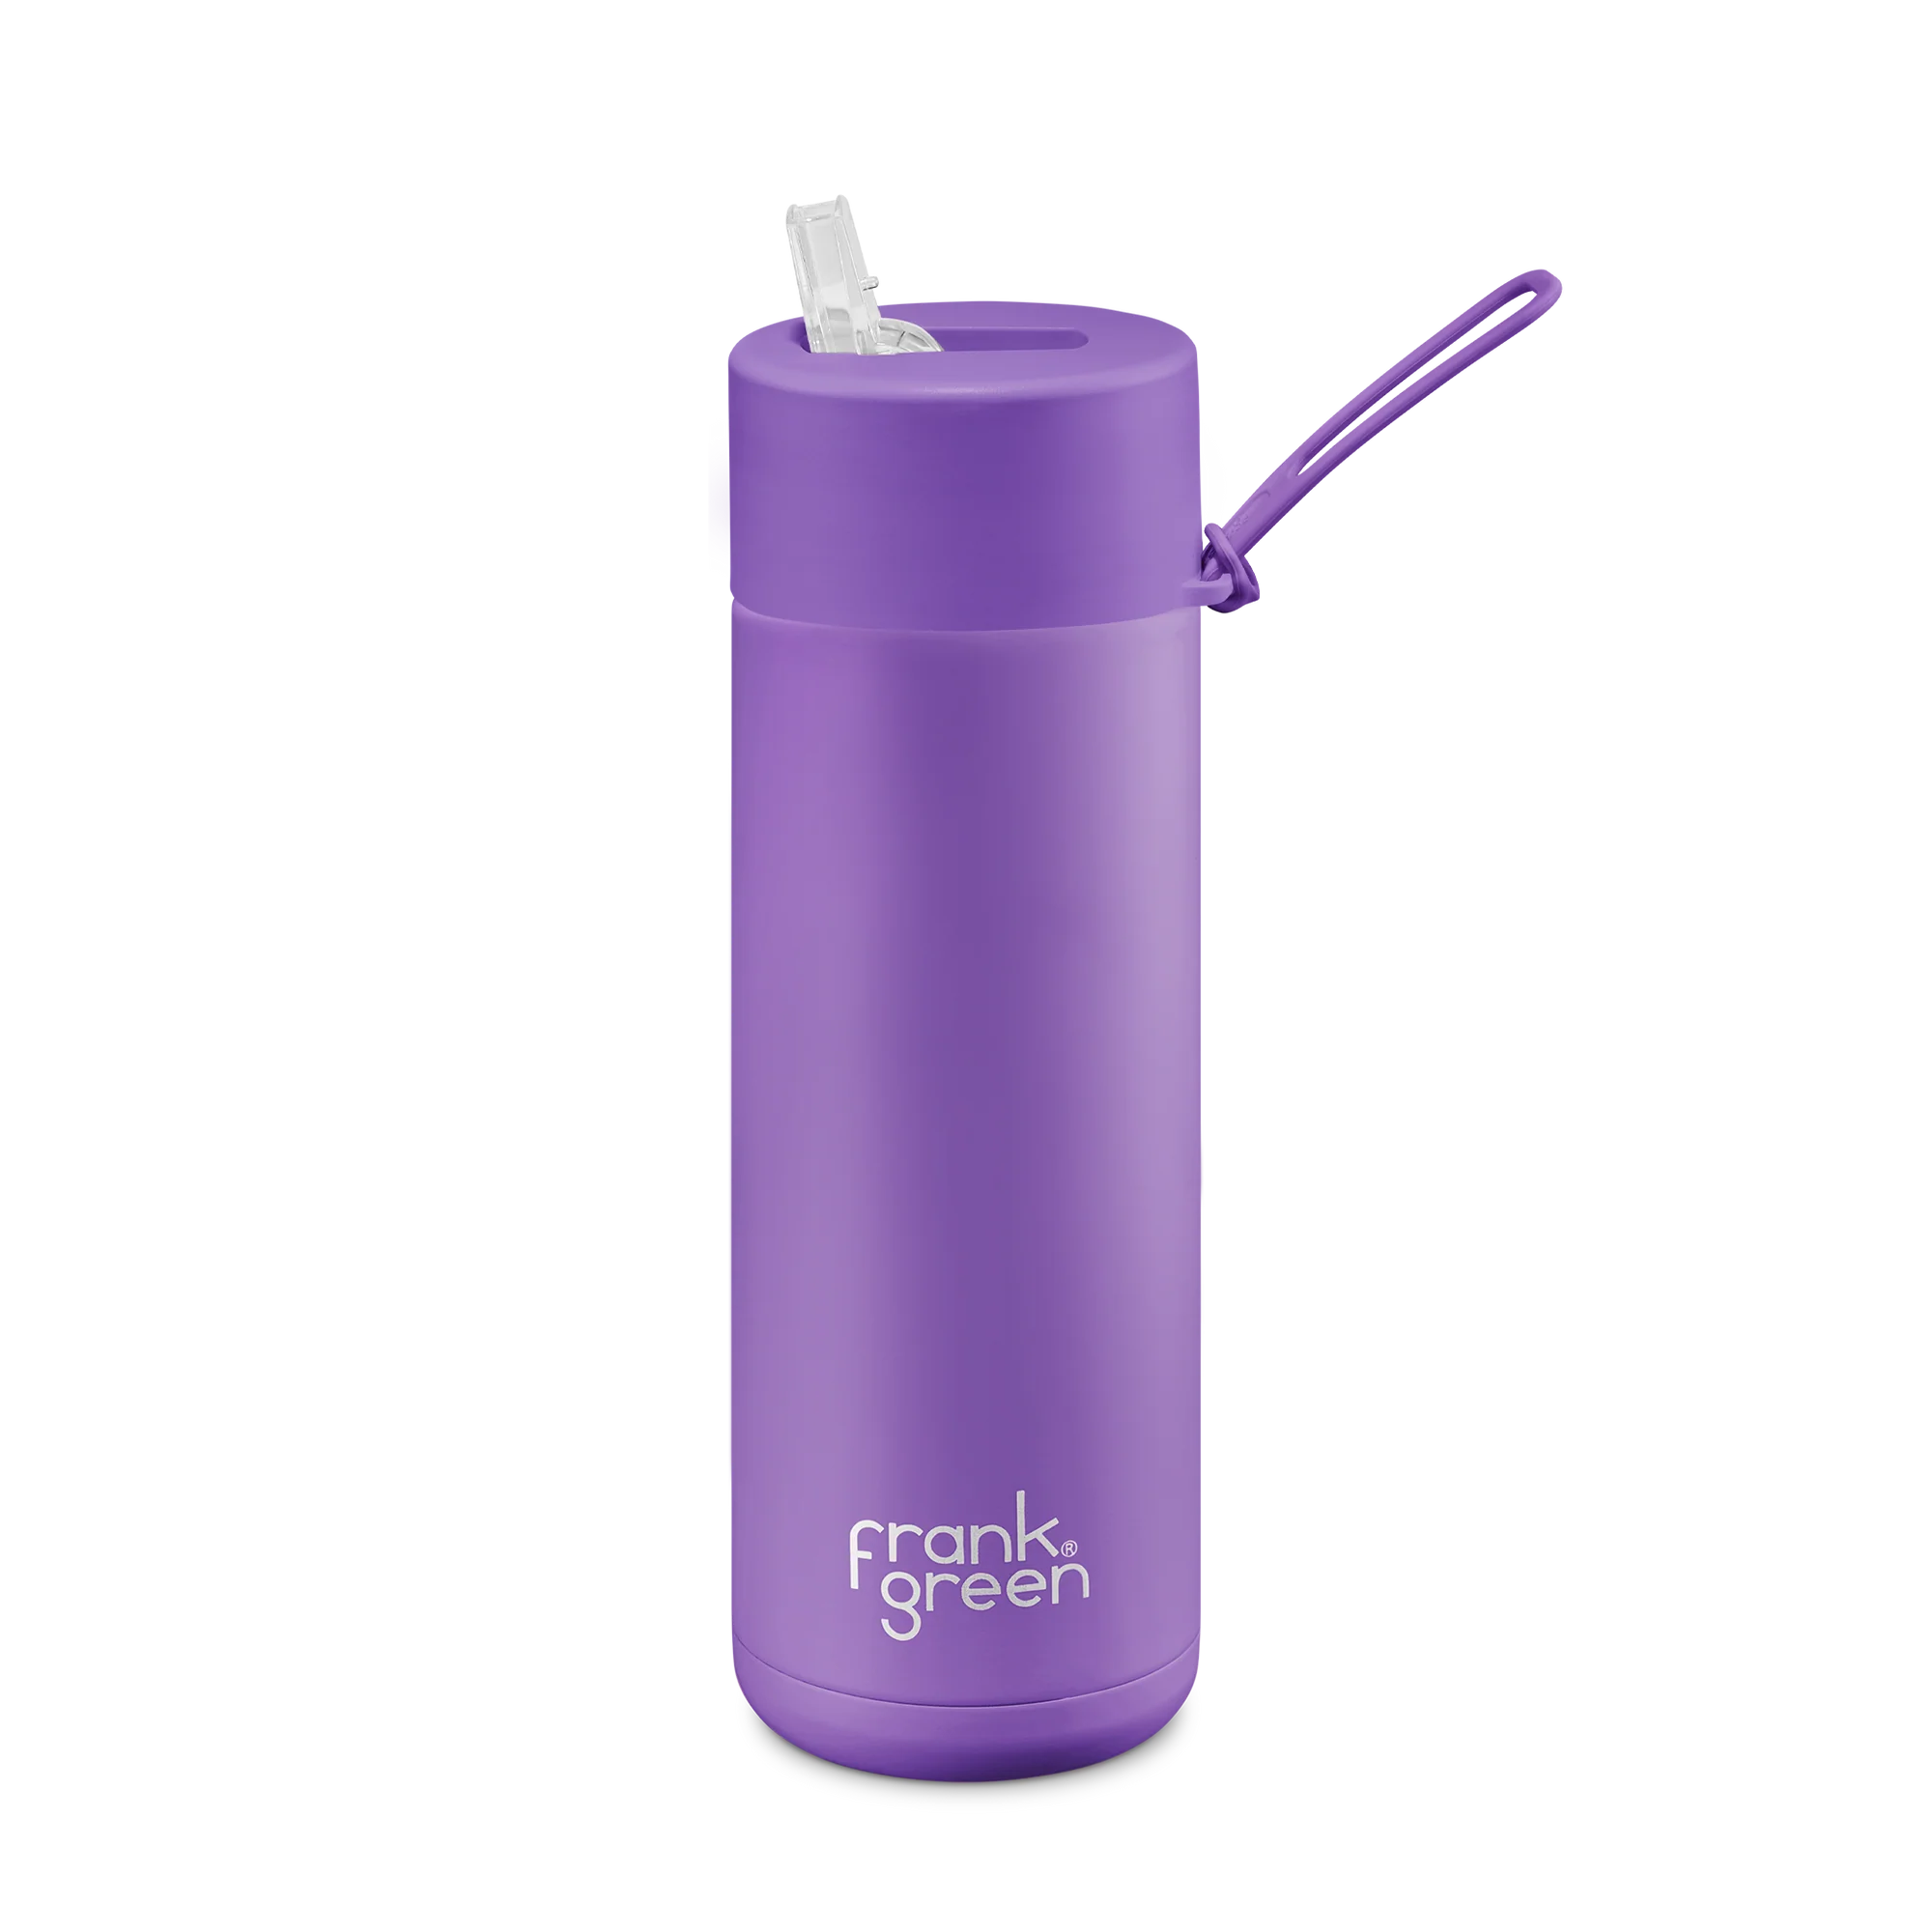 Frank Green Stainless Steel Ceramic Reusable Bottle Cosmic Purple With Straw 20oz/595ml